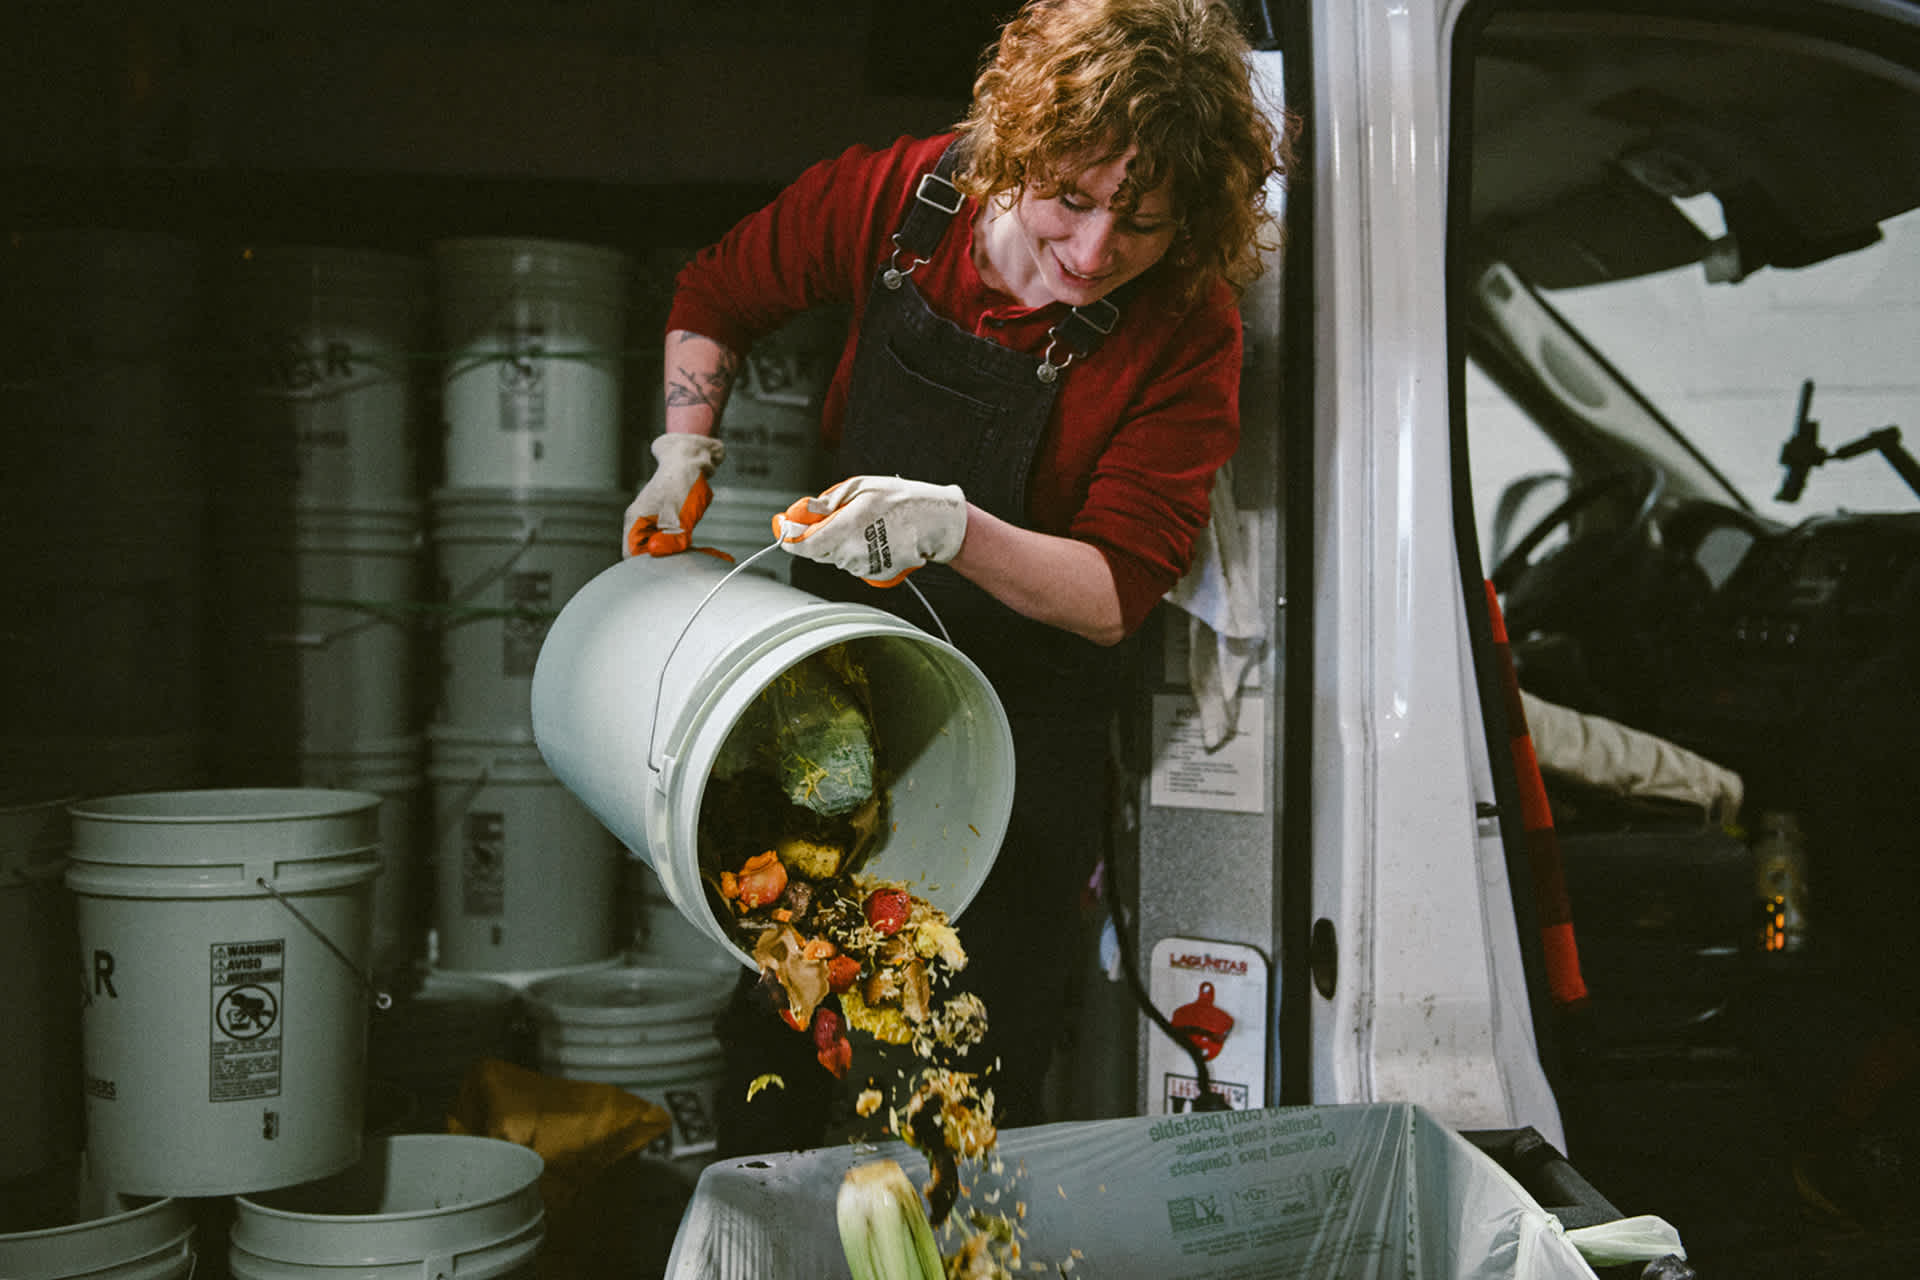 A worker pours a bucket of food scraps into a collection bin